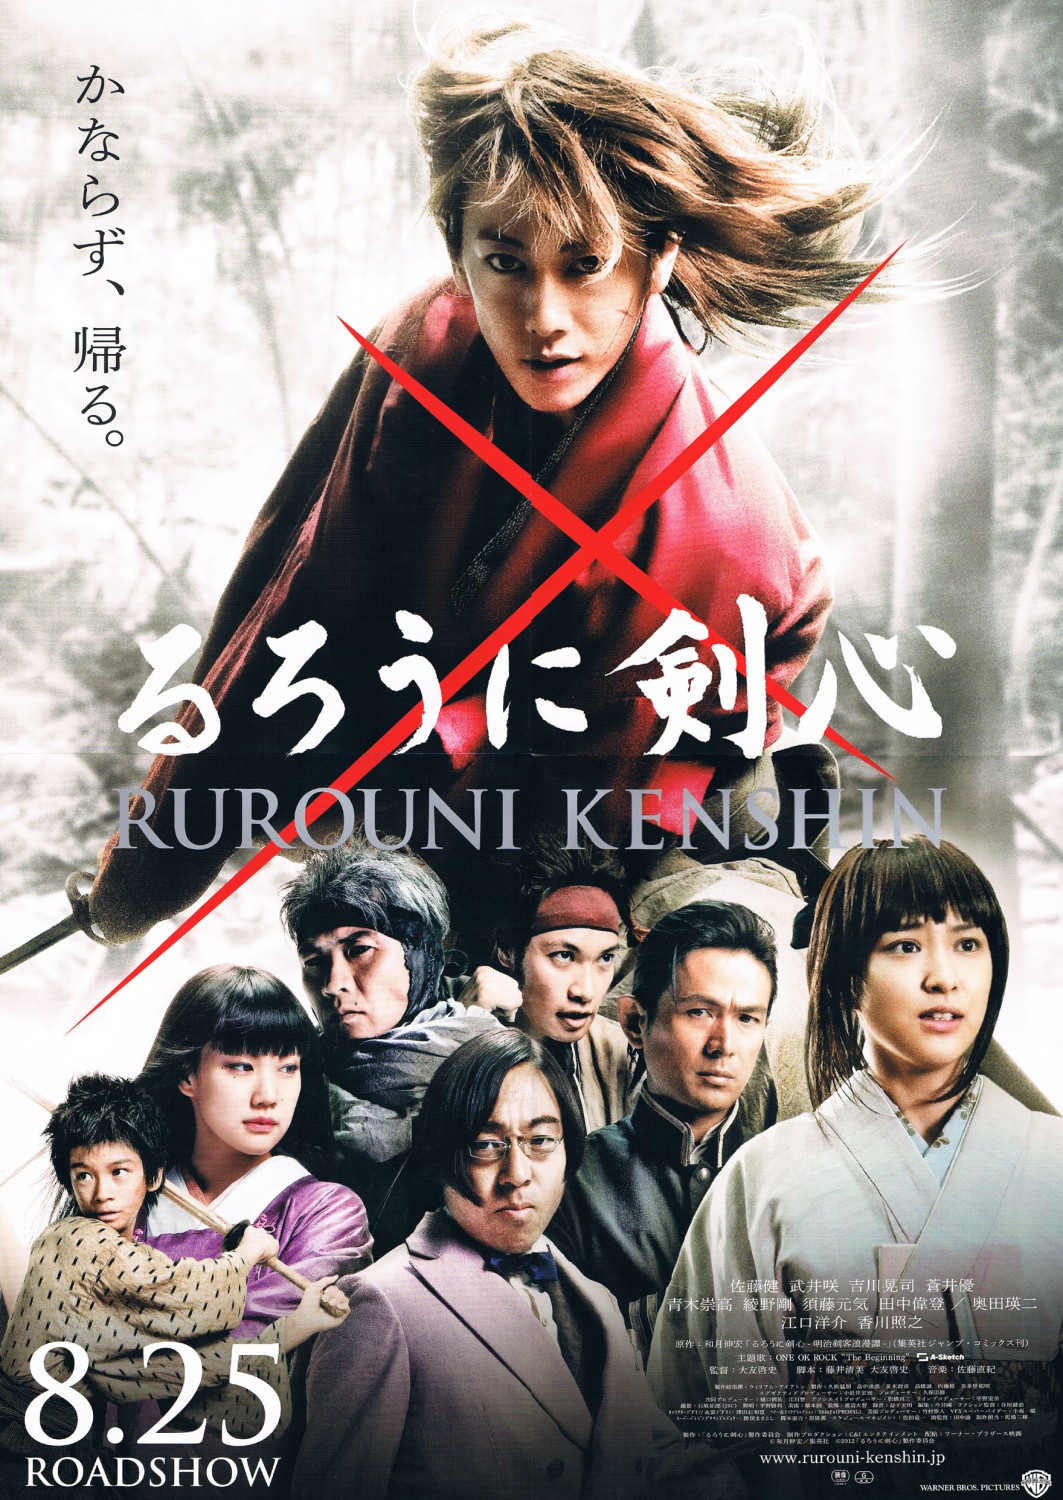 Extra Large Movie Poster Image for Rurouni Kenshin (#1 of 2)